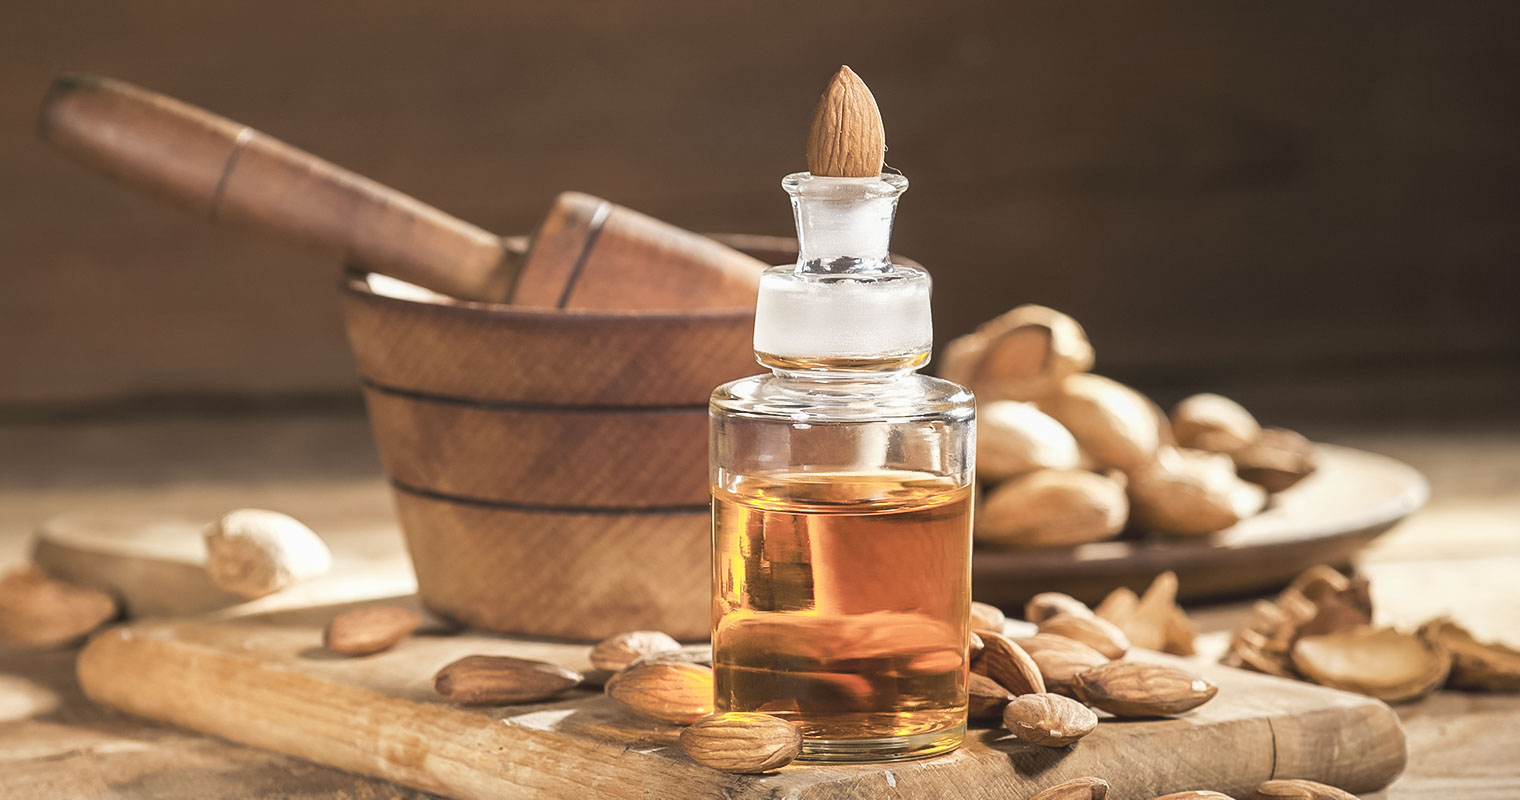 A bottle of Almond oil with a piece of Almond at the cap of the bottle